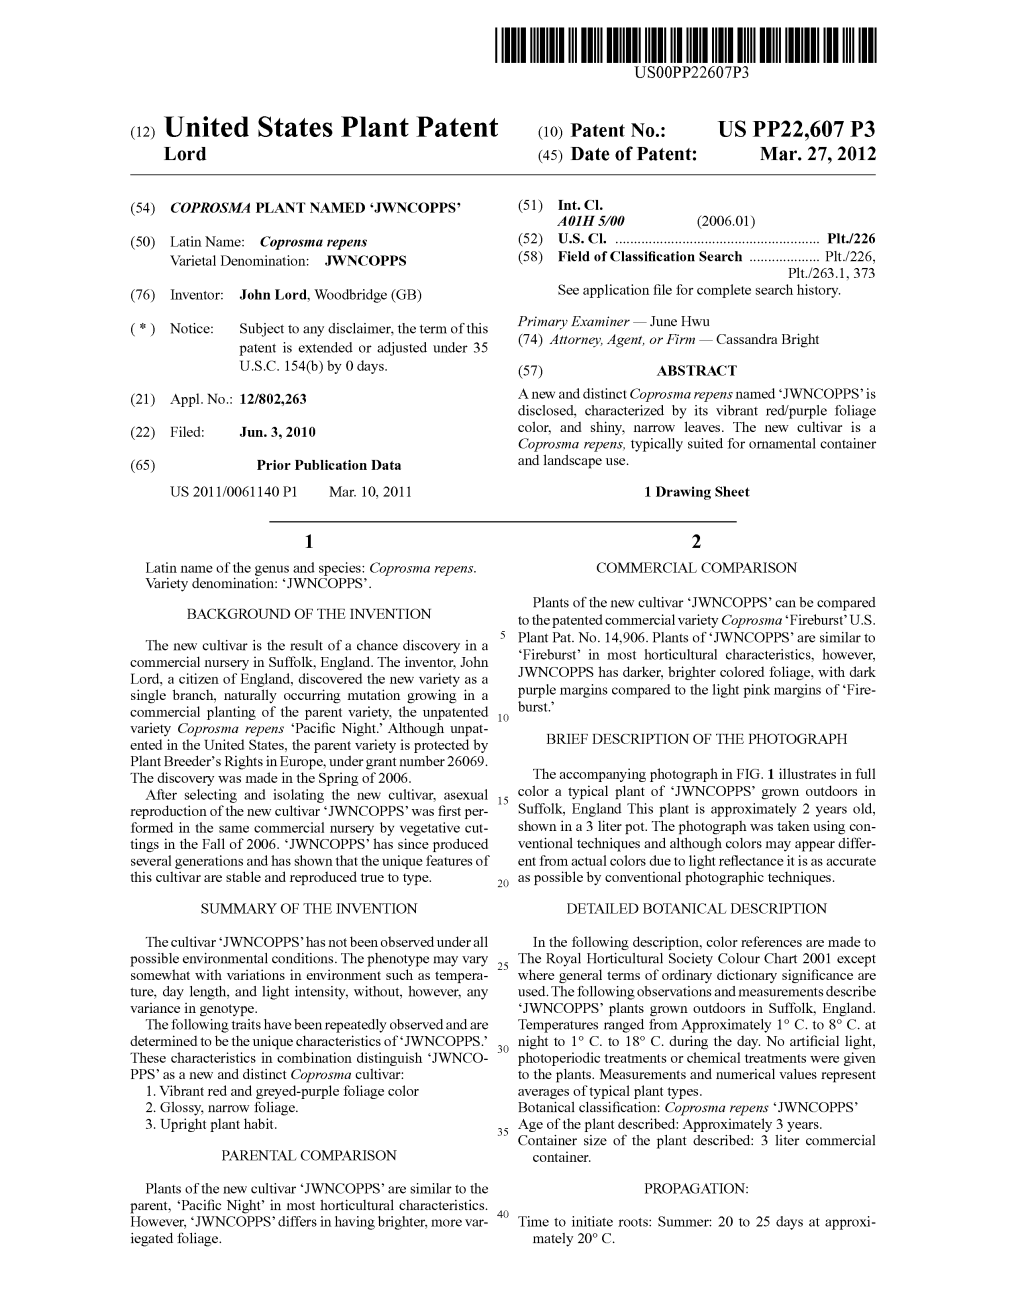 (12) United States Plant Patent (10) Patent No.: US PP22.607 P3 Lord 45) Date of Patent: Mar